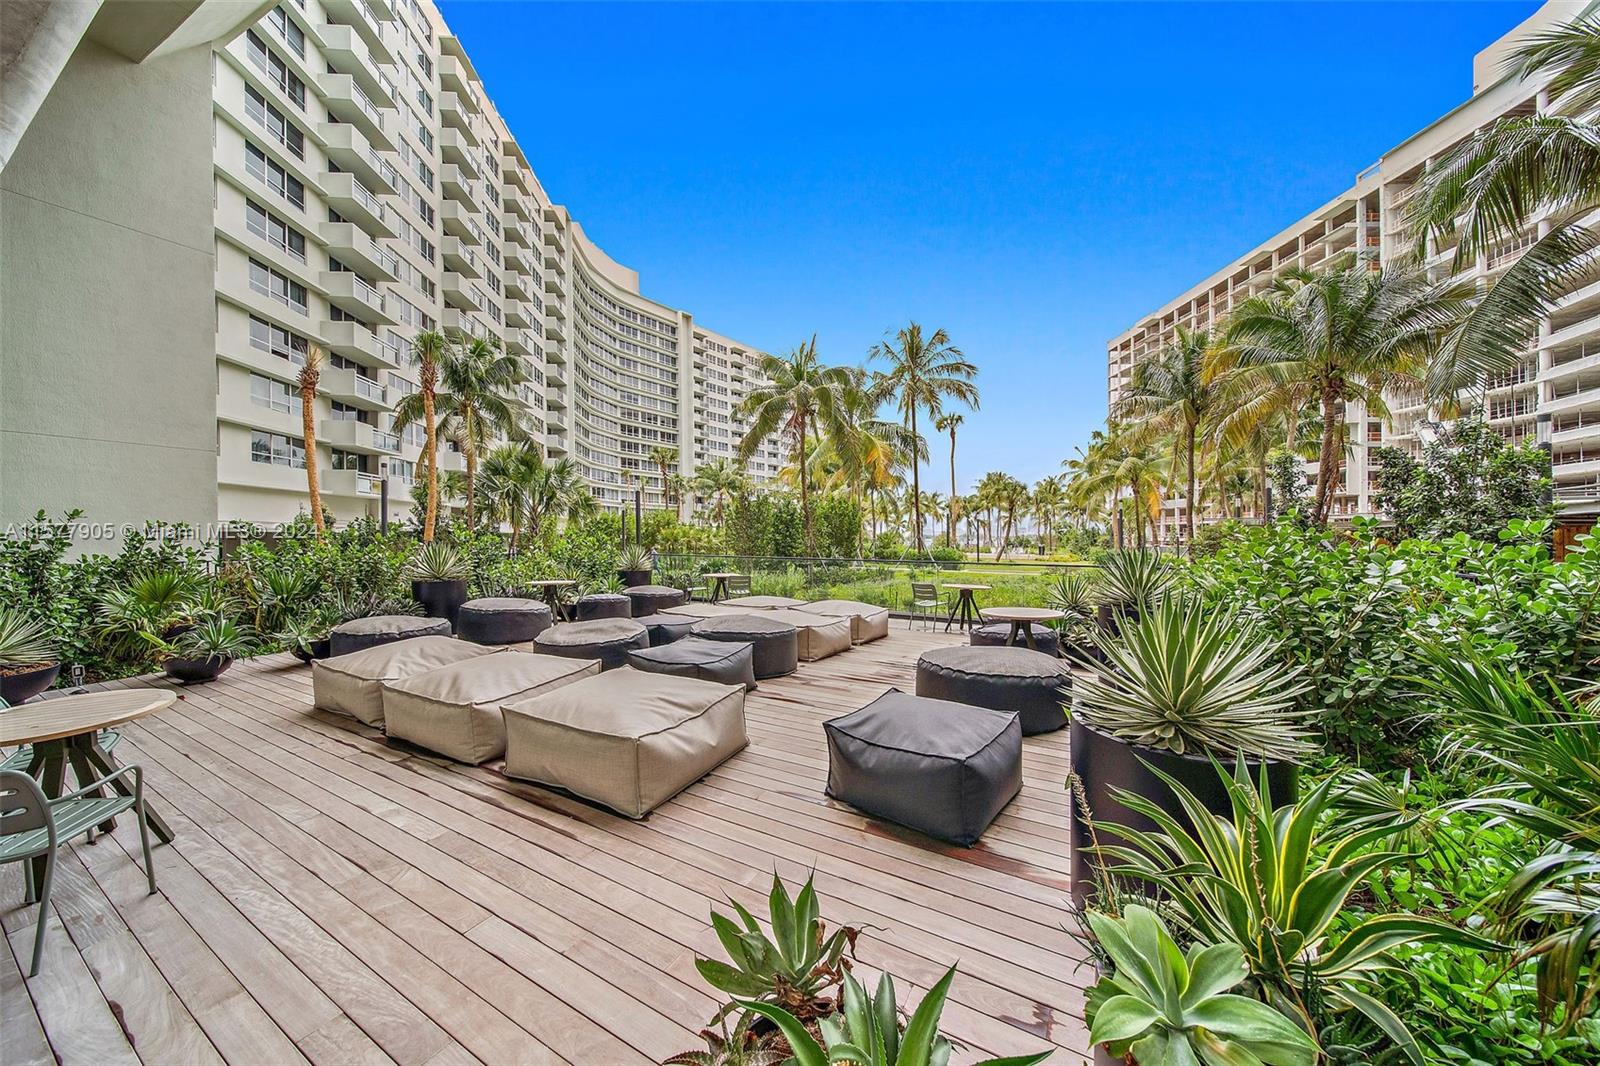 AVAILABLE 06/08 (UNIT CAN'T BE SHOWN TILL AVAILABLE DATE). Welcome to Flamingo Point. This very spacious 1 bed faces E & has spectacular views. Features wood floors throughout, modern kitchen & baths w/SS appliances & granite counter tops. Amenities include a fitness center, resort style bay front pools surrounded by cabanas, l lounge chairs, a BBQ area. Move in costs are 1st month + $1500 deposit. Parking cost 1st vchl. $187 p/m. Pet Fee: $500+$50/month. *FAST APPROVAL! (NOTE: Rental rates are subject to change depending on move-in date and lease term. Advertised rate is best rate and maybe on leases longer than 12 months. Proof of income greater than 3x 1 month's rent is required and minimum credit score of 620 or higher in order to be approved).